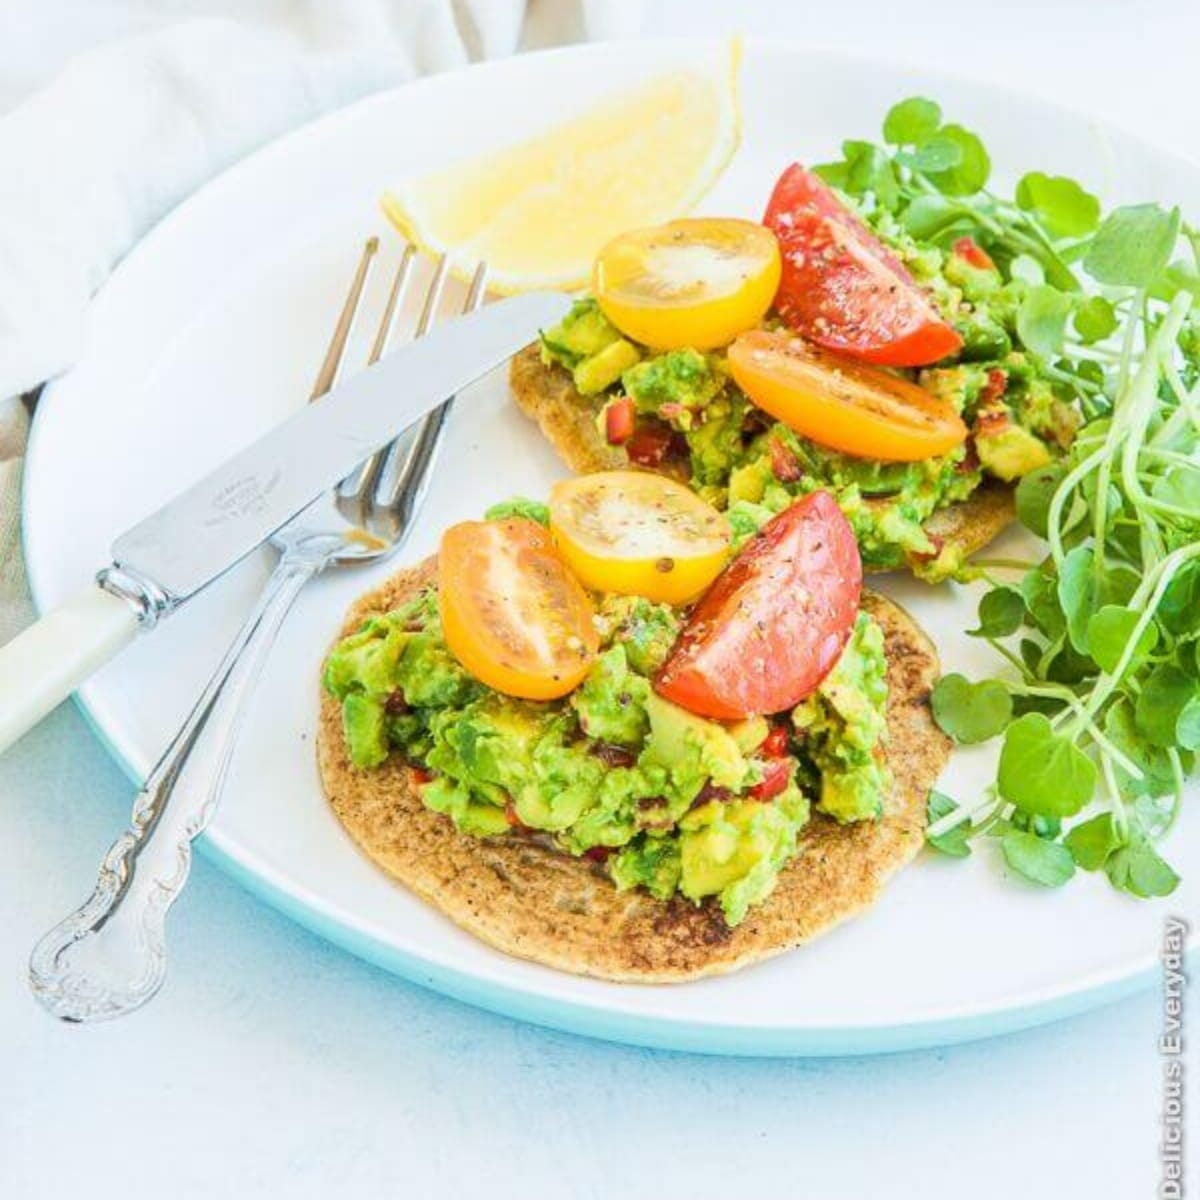 Chickpea Pancakes with Avocado, Tomato, and Watercress | Delicious Everyday